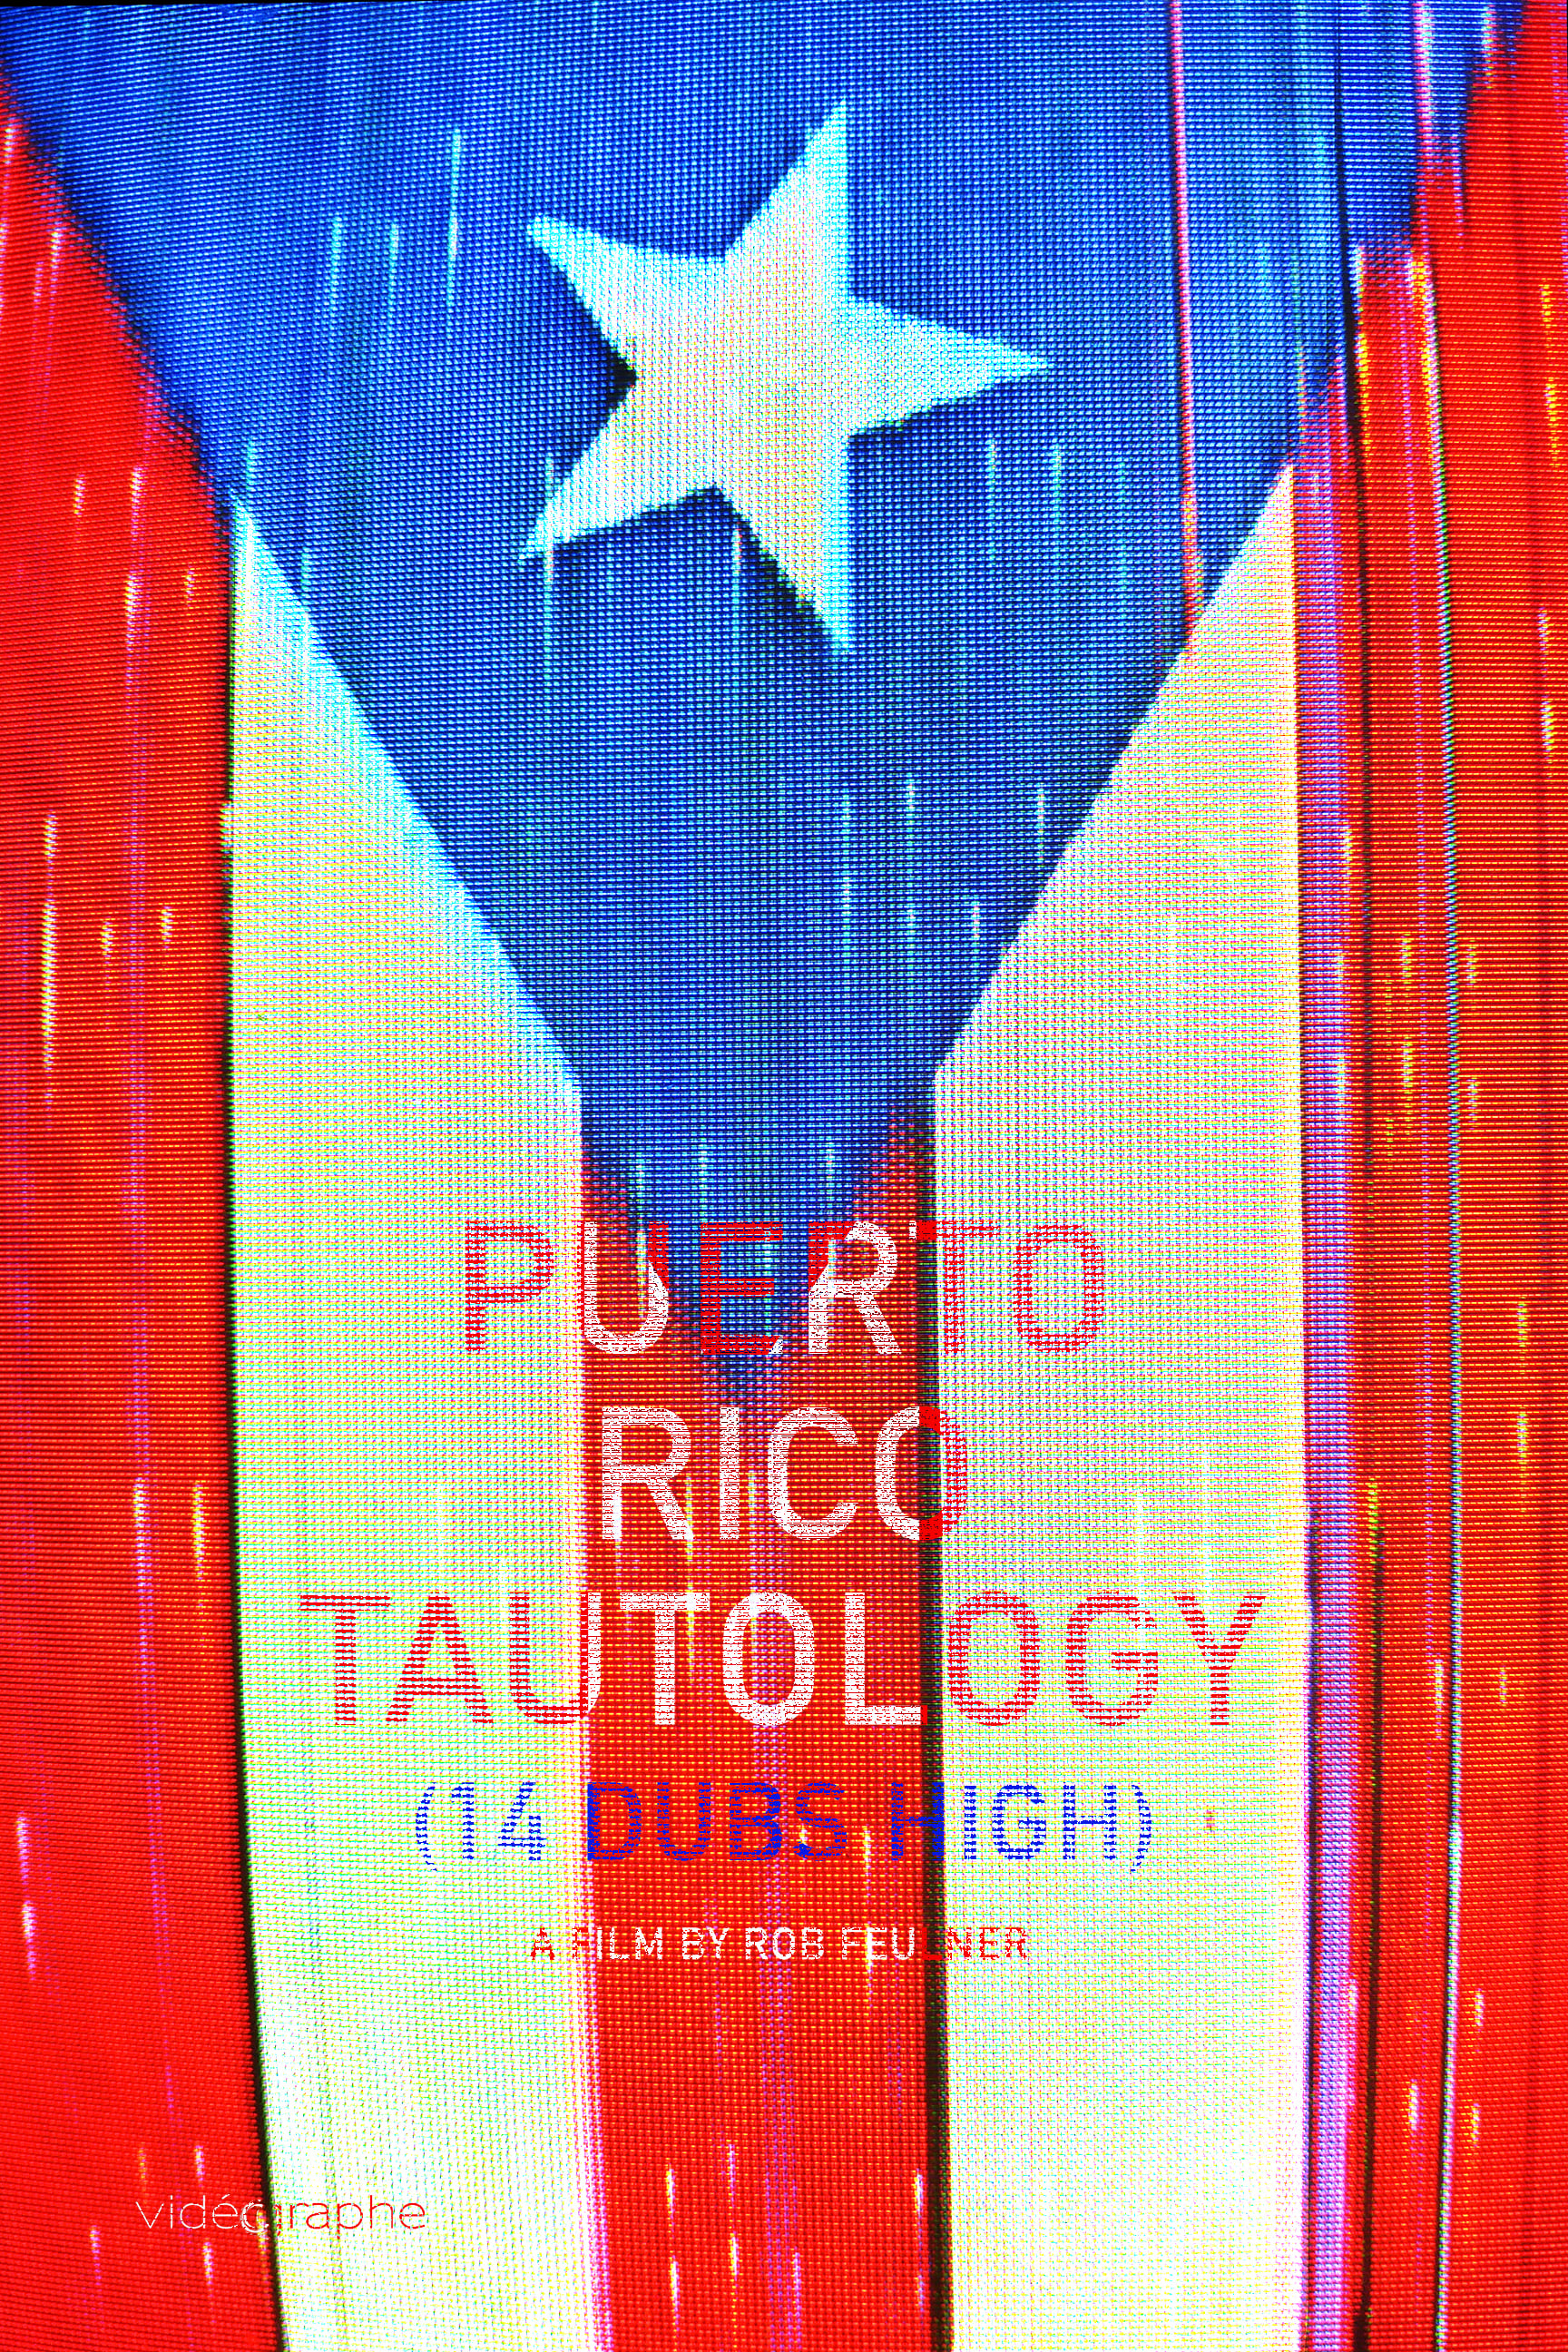 Puerto Rico Tautology (14 dubs high)